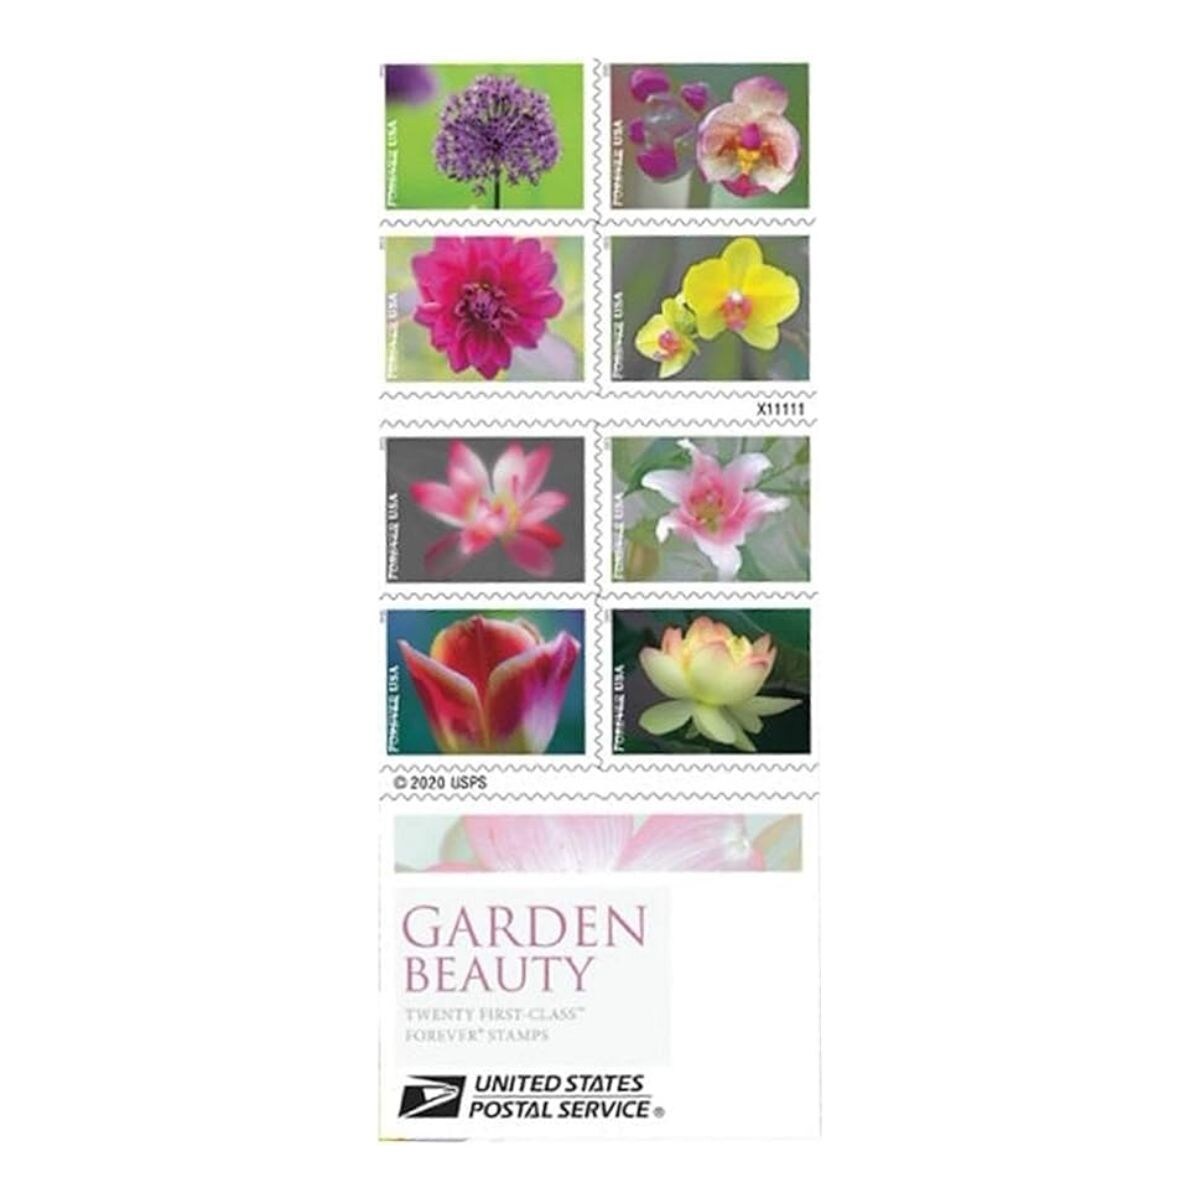 Beautiful Garden Forever Postage Stamps